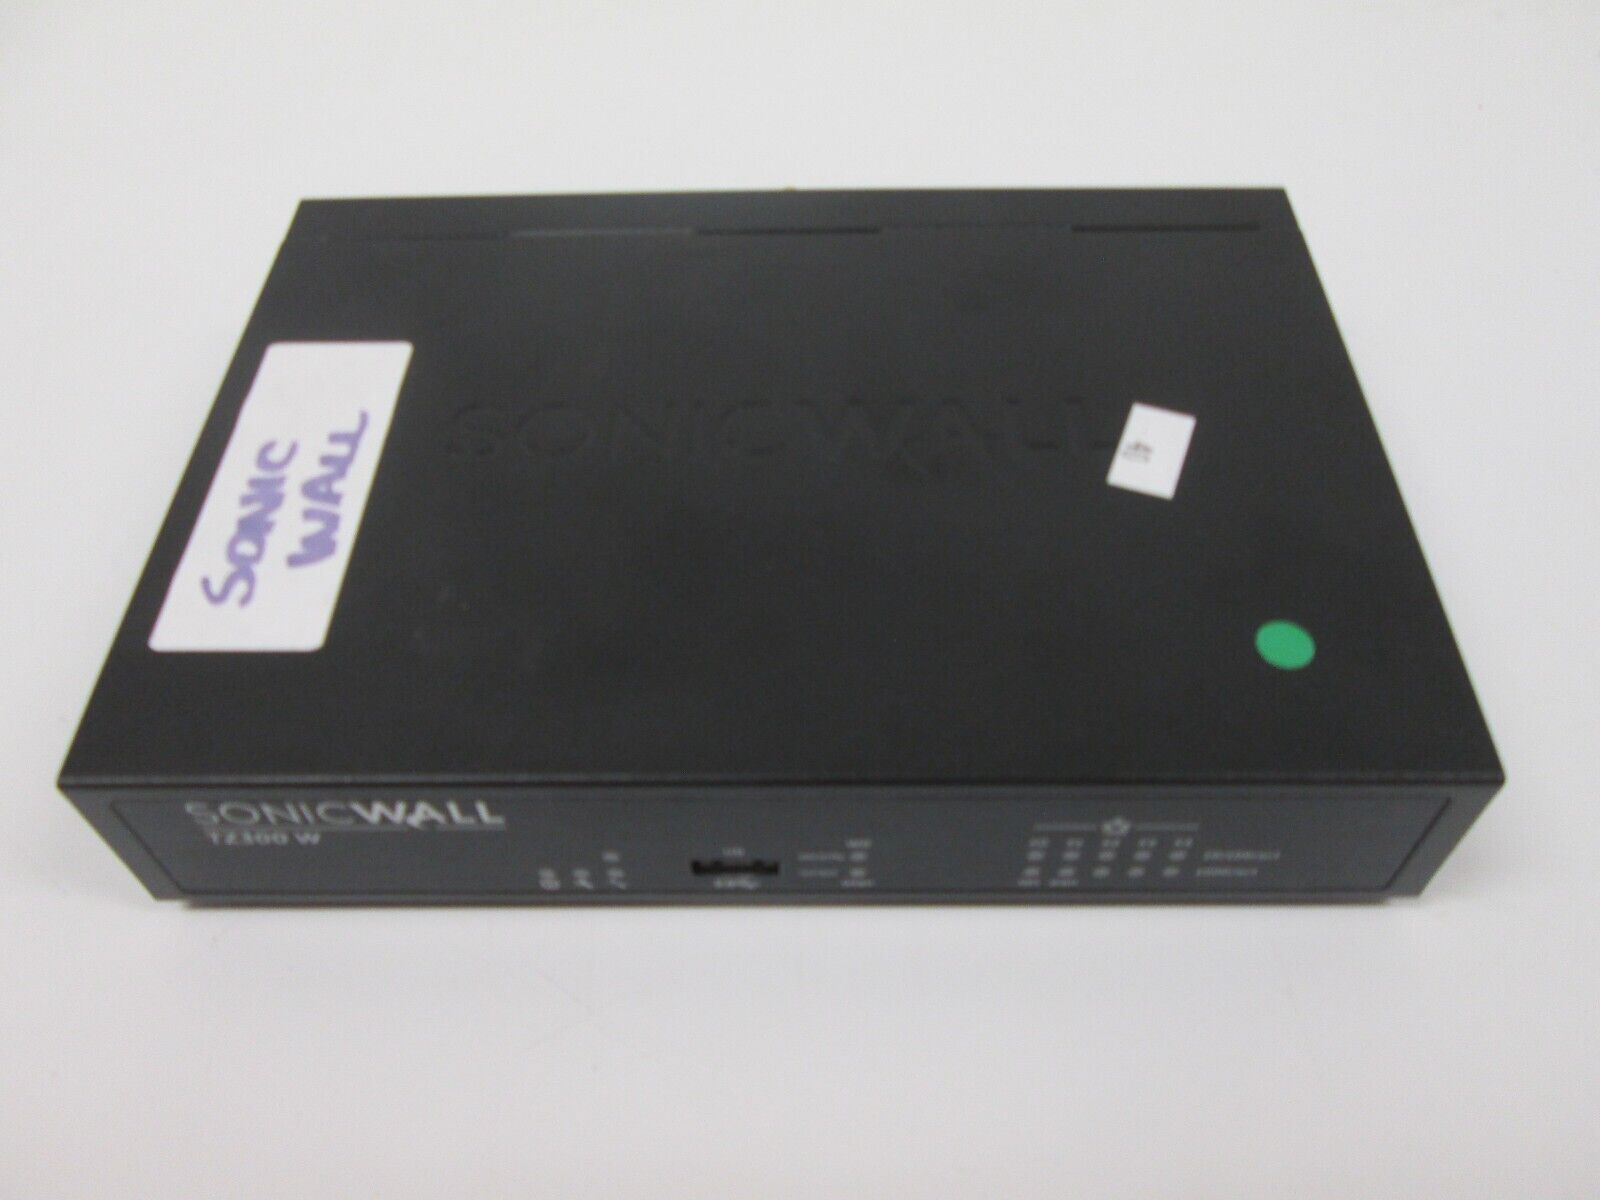 SONICWALL TZ300W Network Security Appliance APL28-0B5 No Power Supply NO ANTENNA